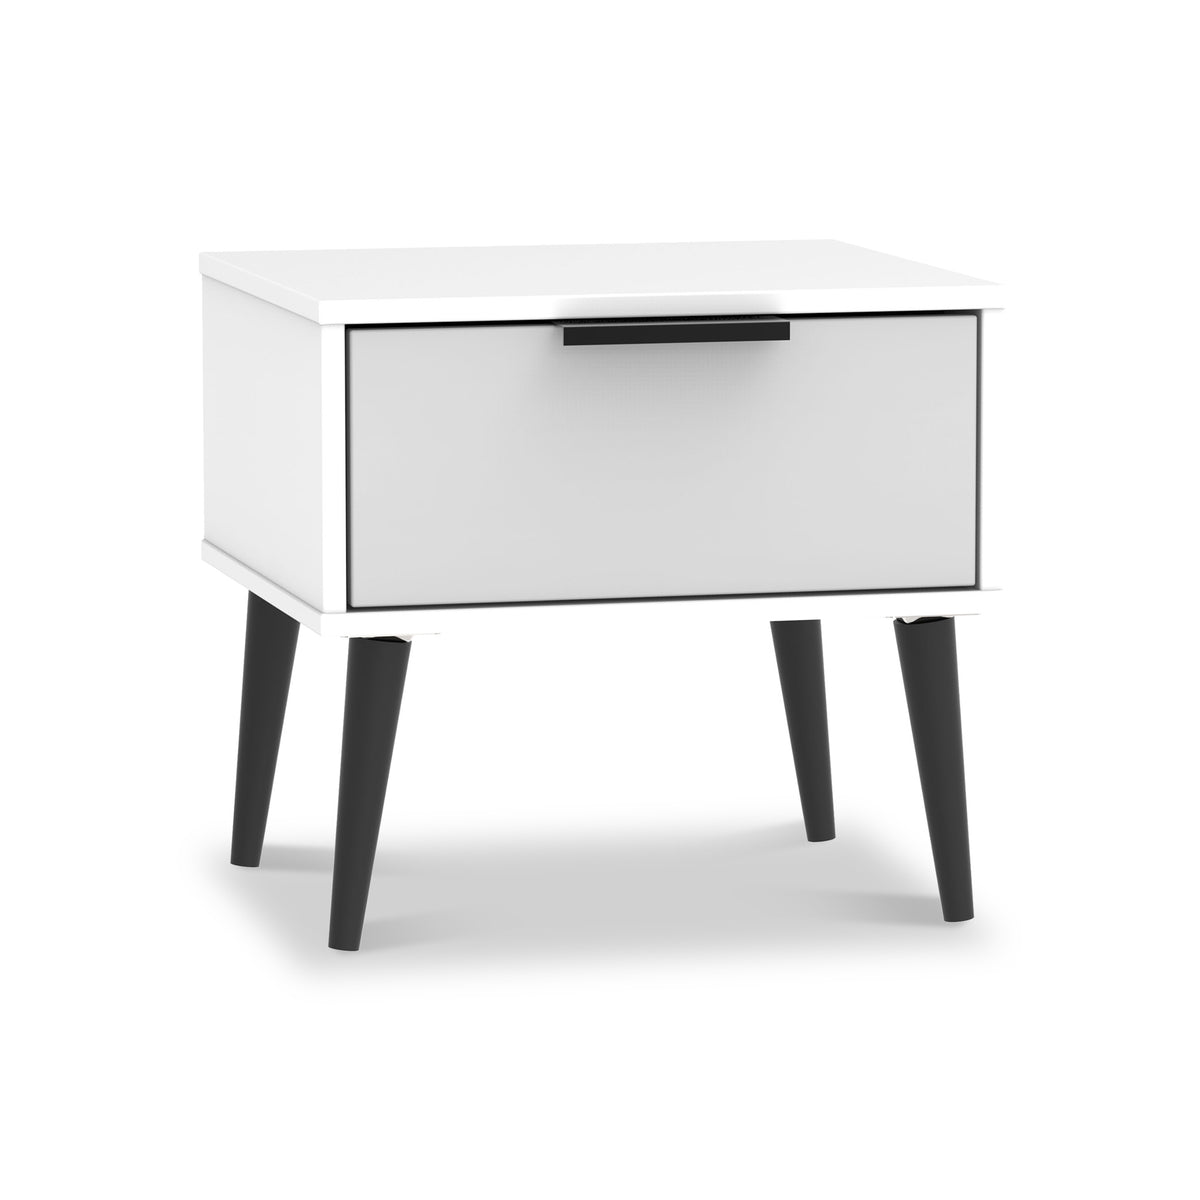 Asher Grey 1 Drawer Bedside Table from Roseland